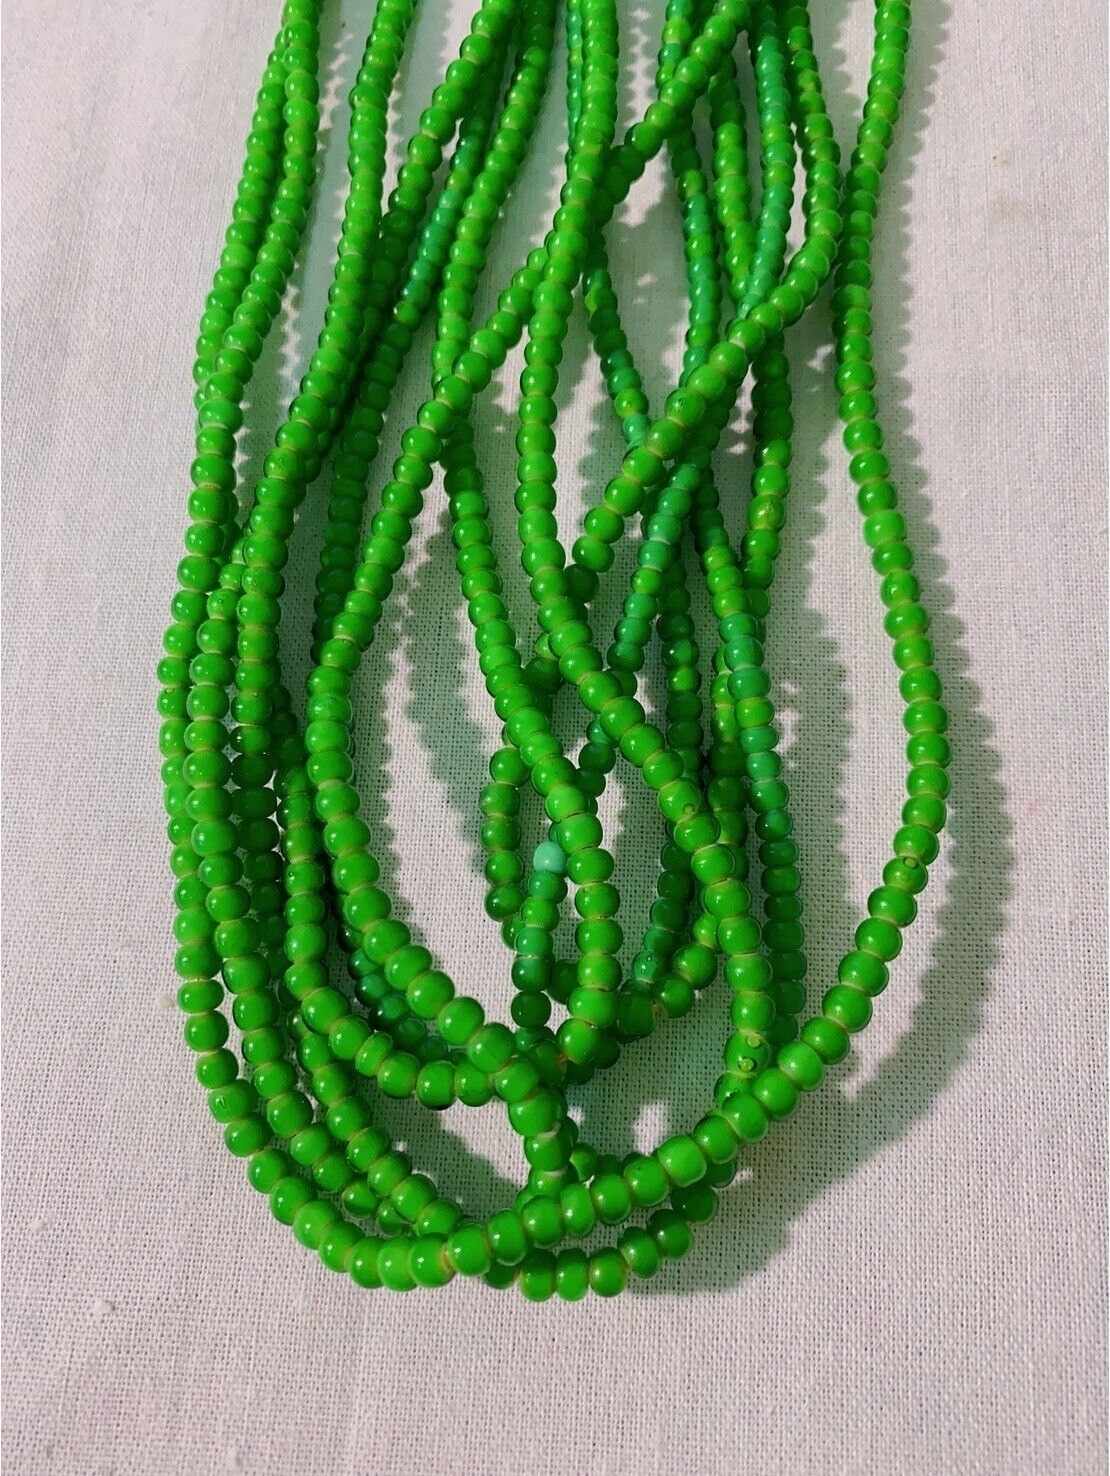 Green 4 mm Antique Venetian  White Heart Trade Beads long strand necklace